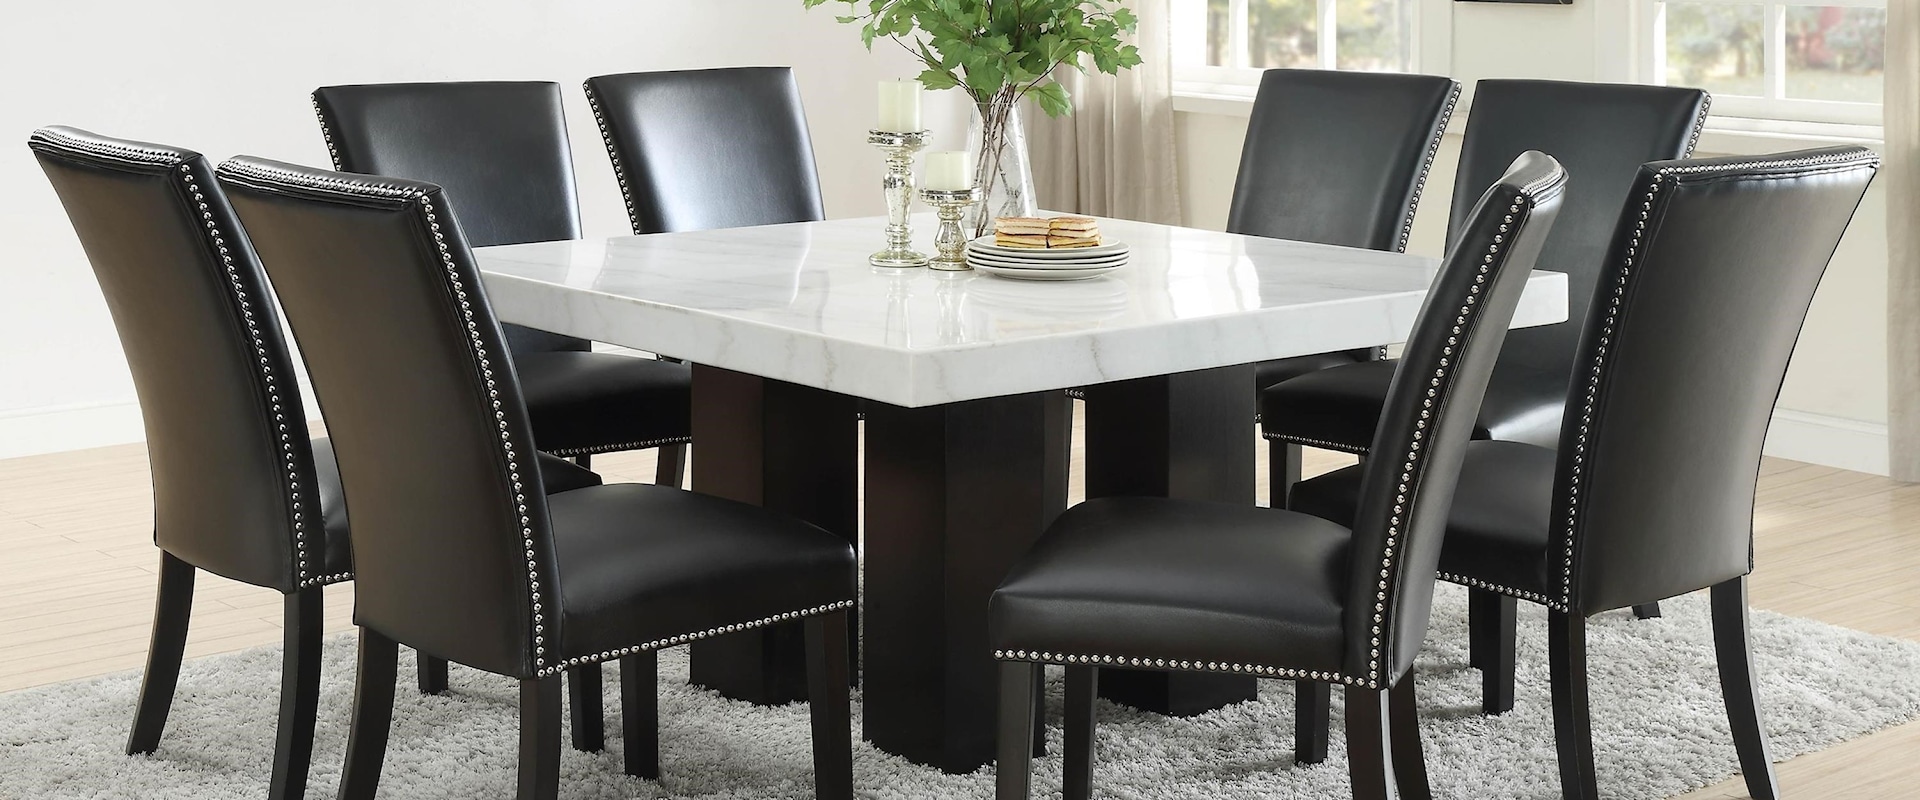 9 Piece Dining Set with Marble Table Top